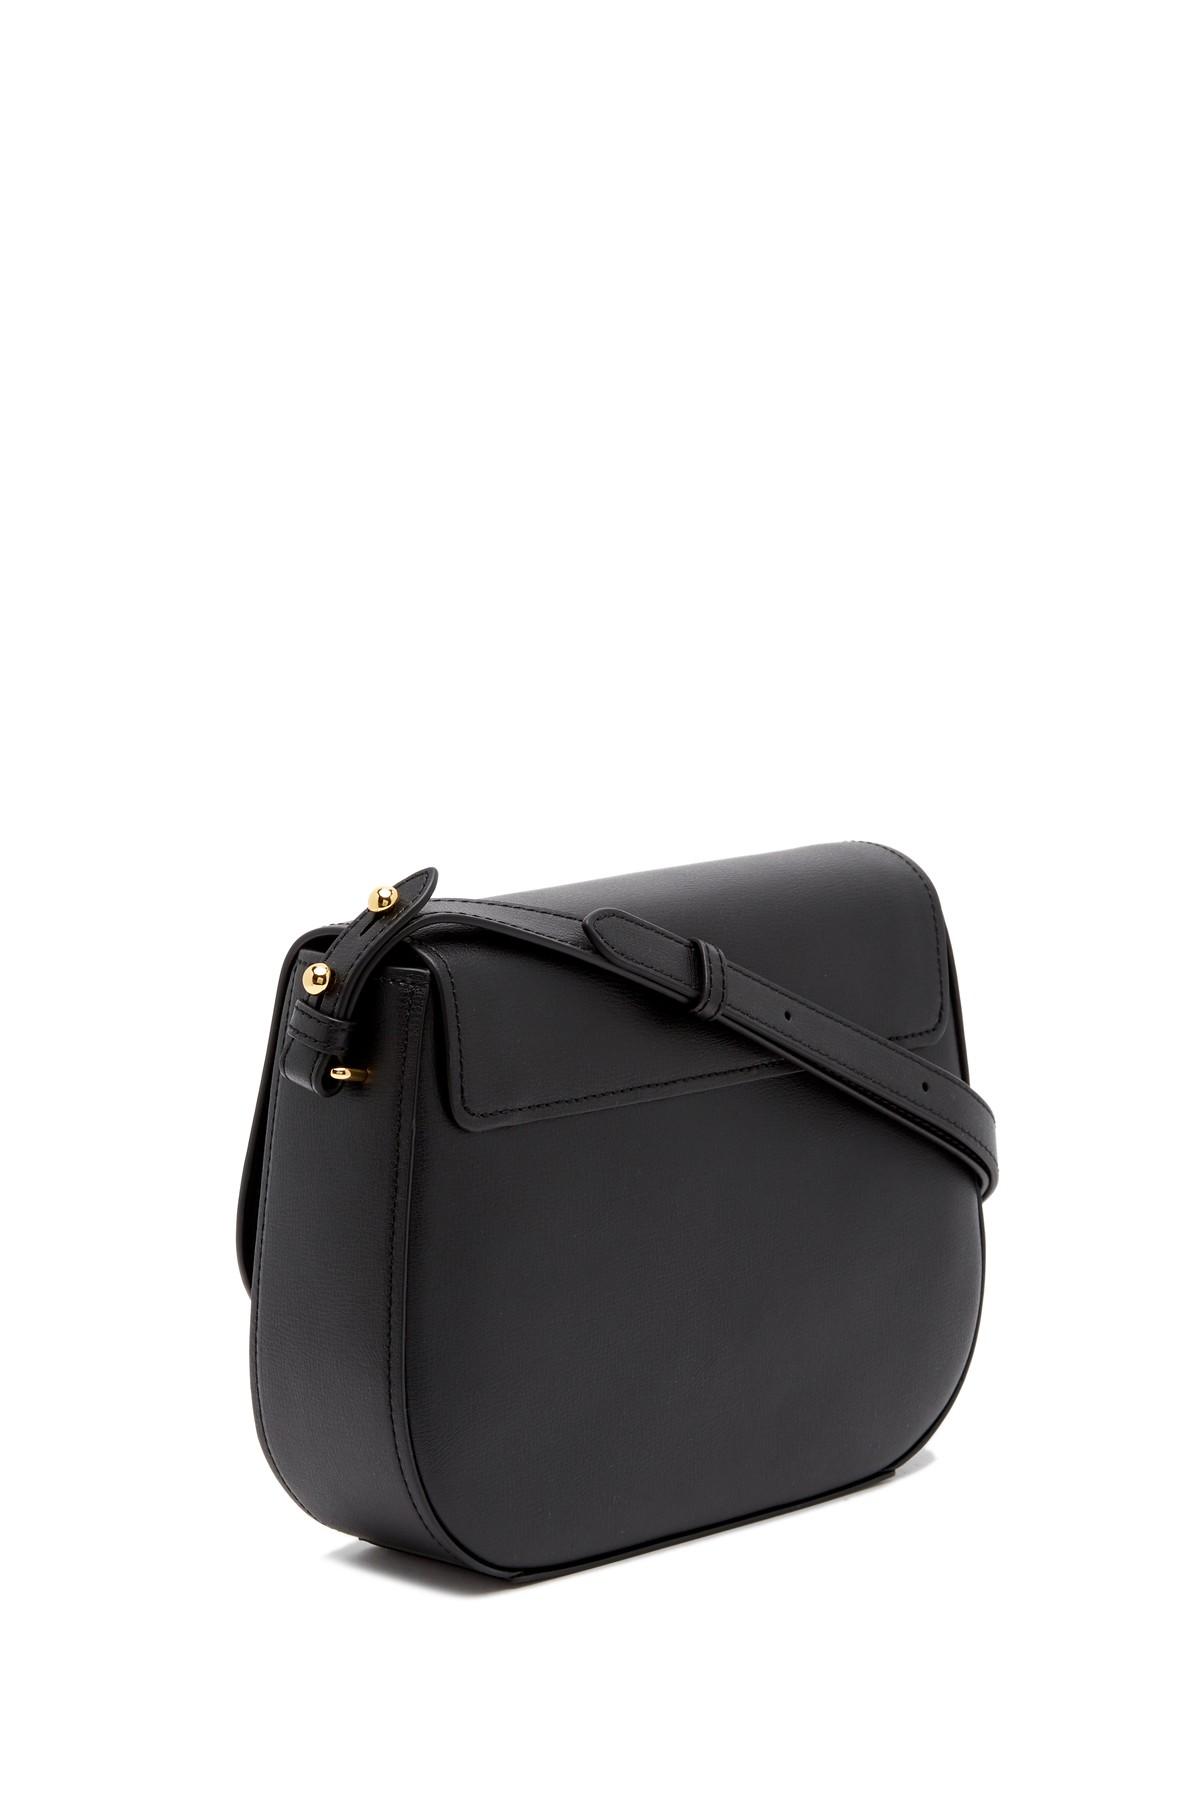 Marc Jacobs Rider Leather Crossbody Bag in Black - Lyst